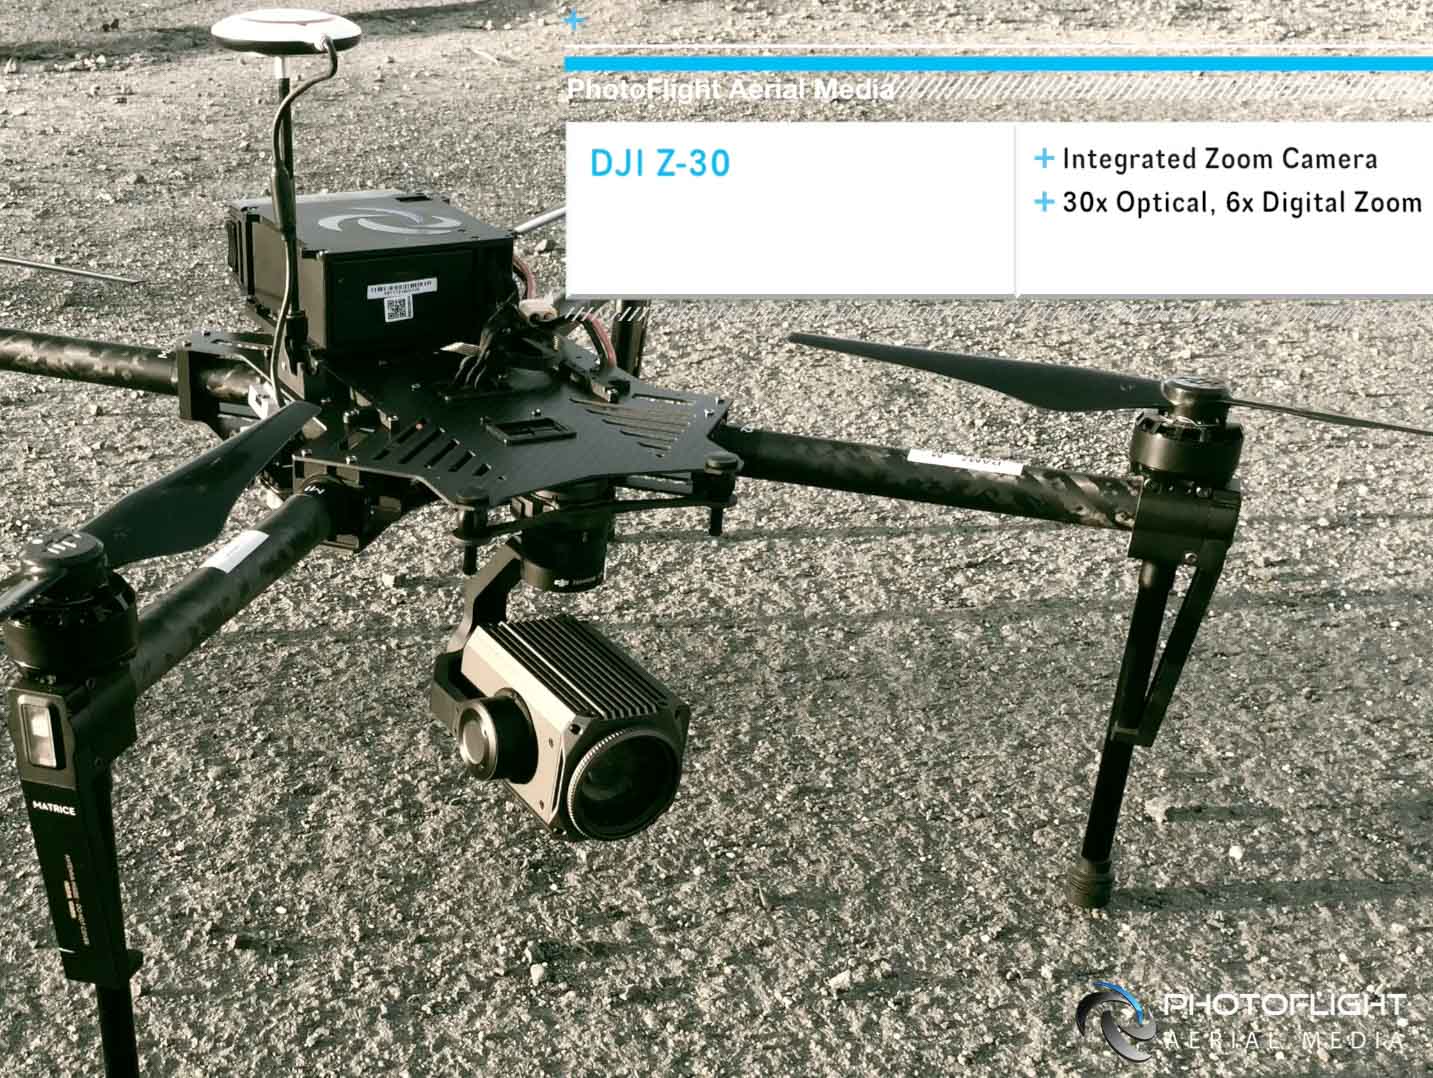 30x Optical Zoom Drone Camera for News and Event Live Broadcast